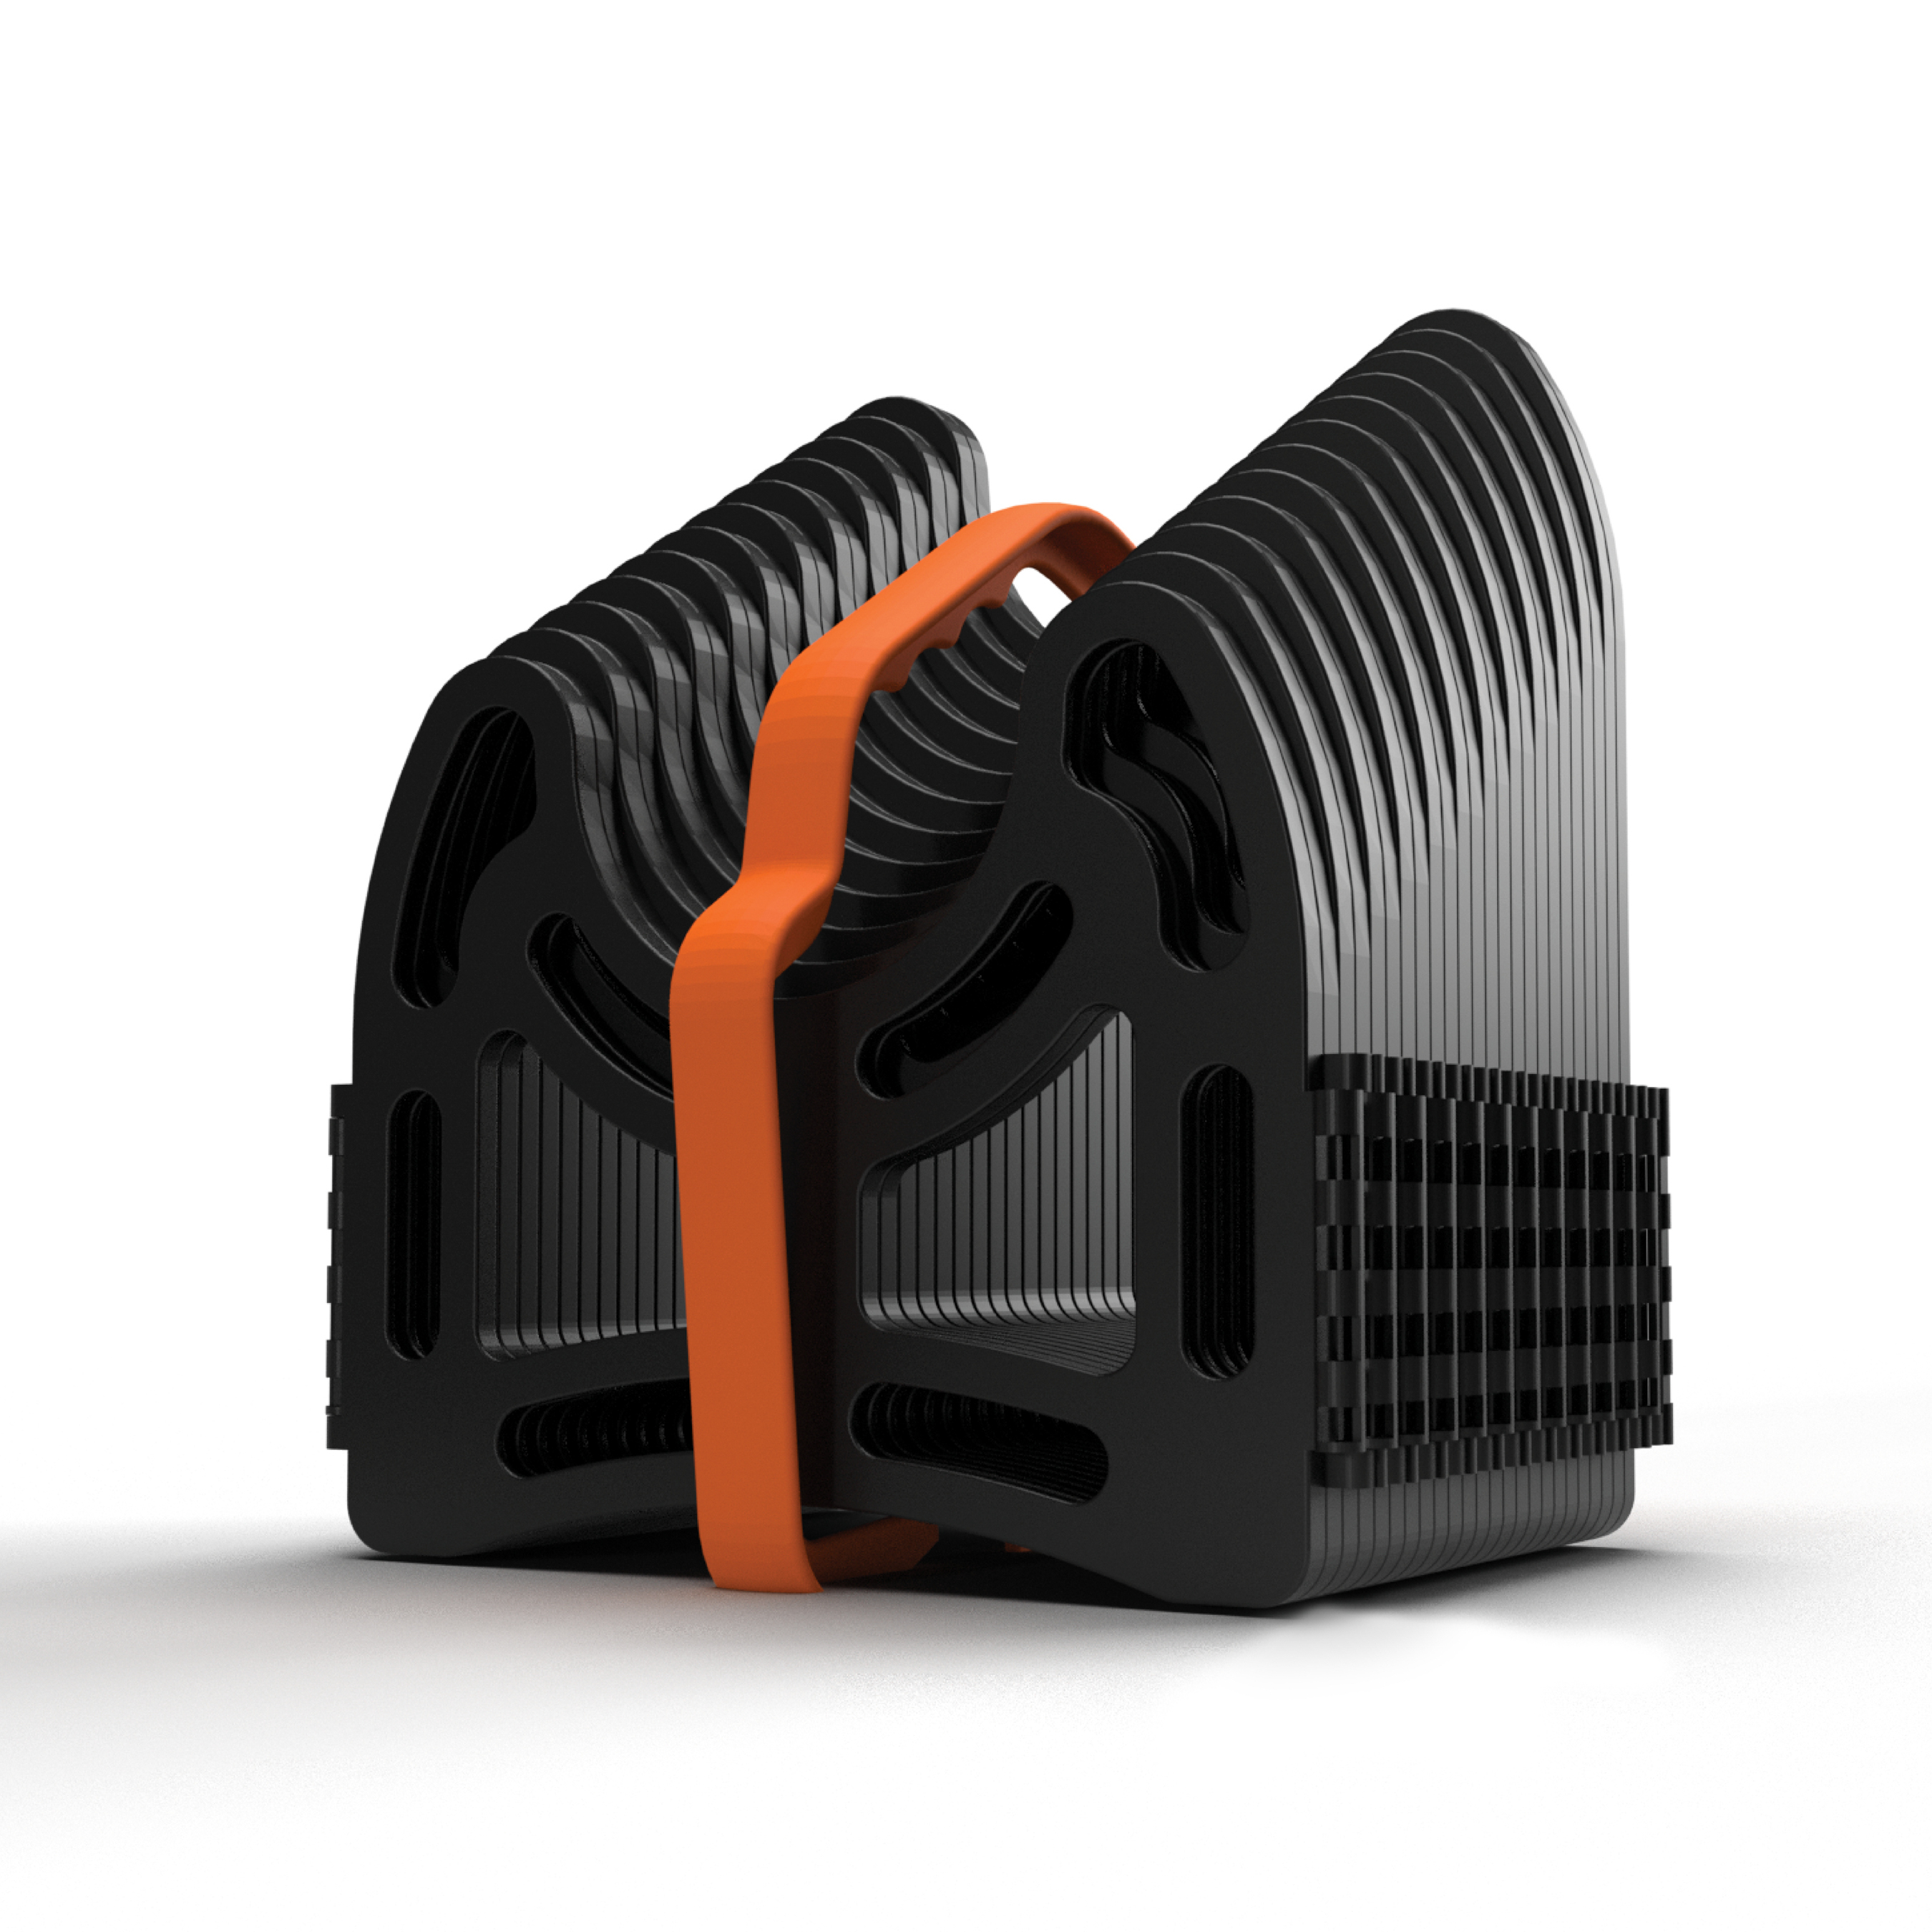 Camco Sidewinder RV Sewer Hose Support - Black, Heavy Duty Plastic, 15-Foot (43041) - image 1 of 7